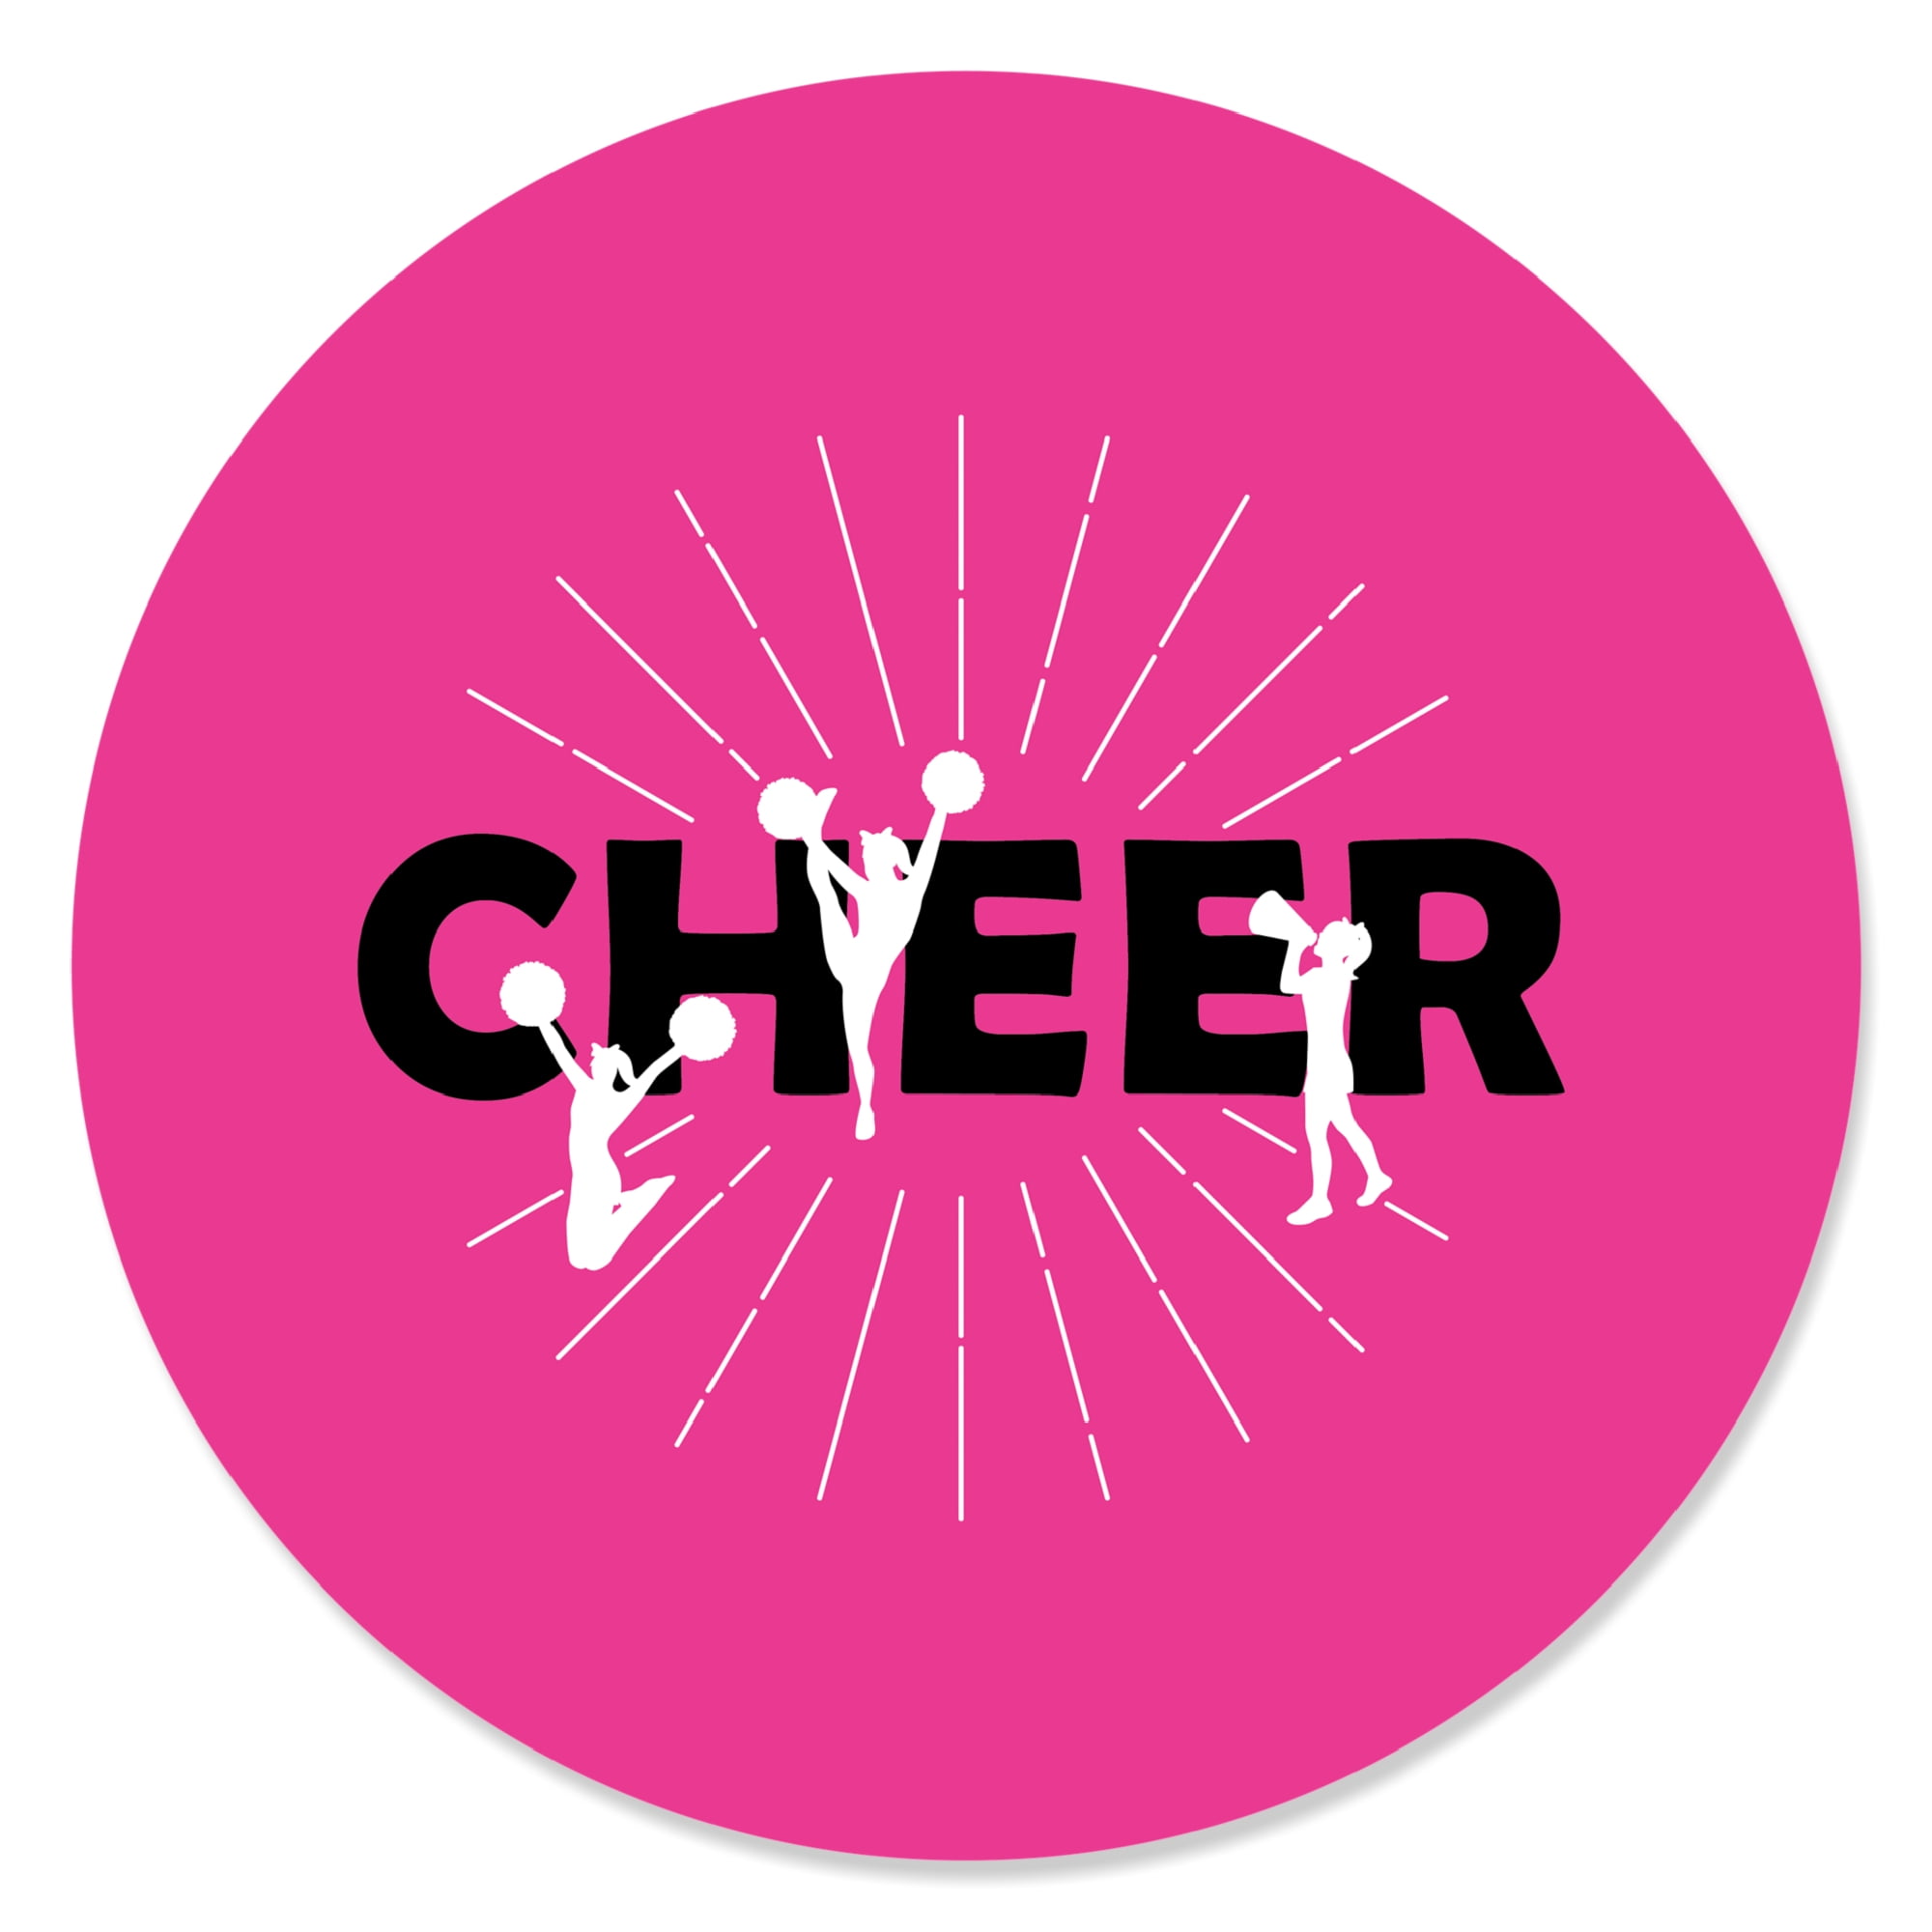 108 I LOVE CHEER CHEERLEADING Birthday Party Favors Stickers Labels Hershey Kiss 